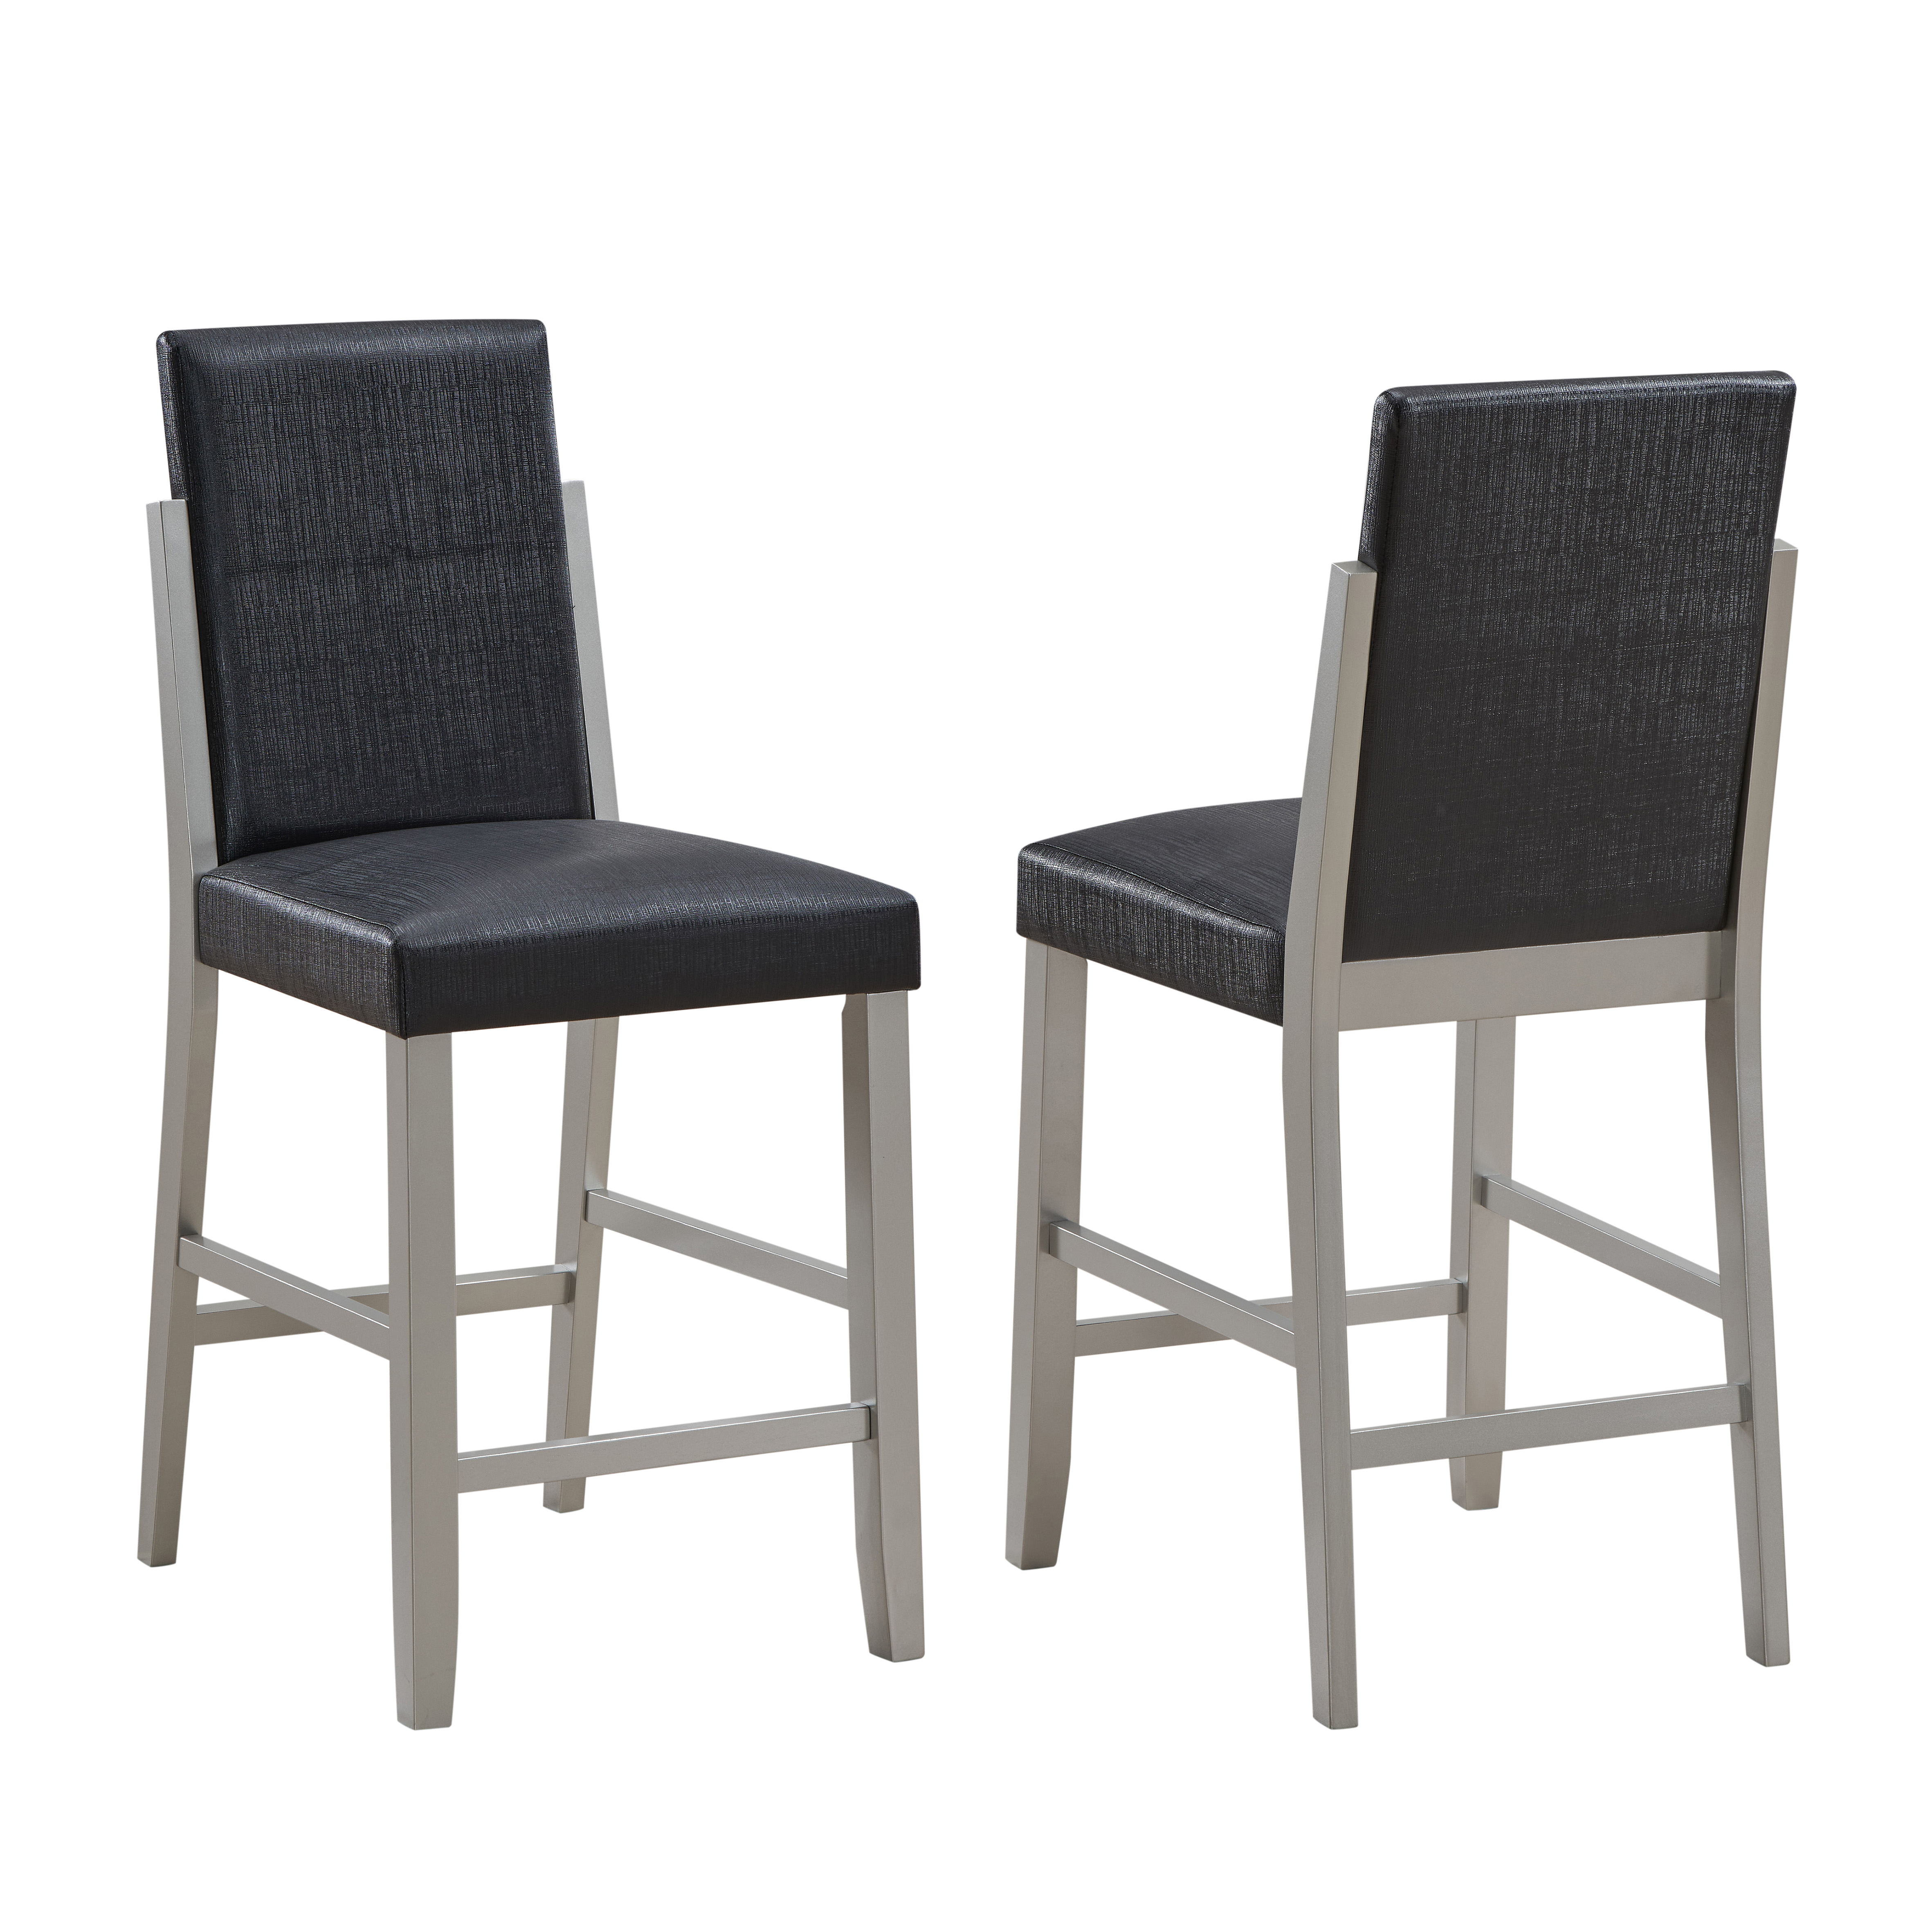 Acelyn Counter Height Stool (Black) - Set of 2